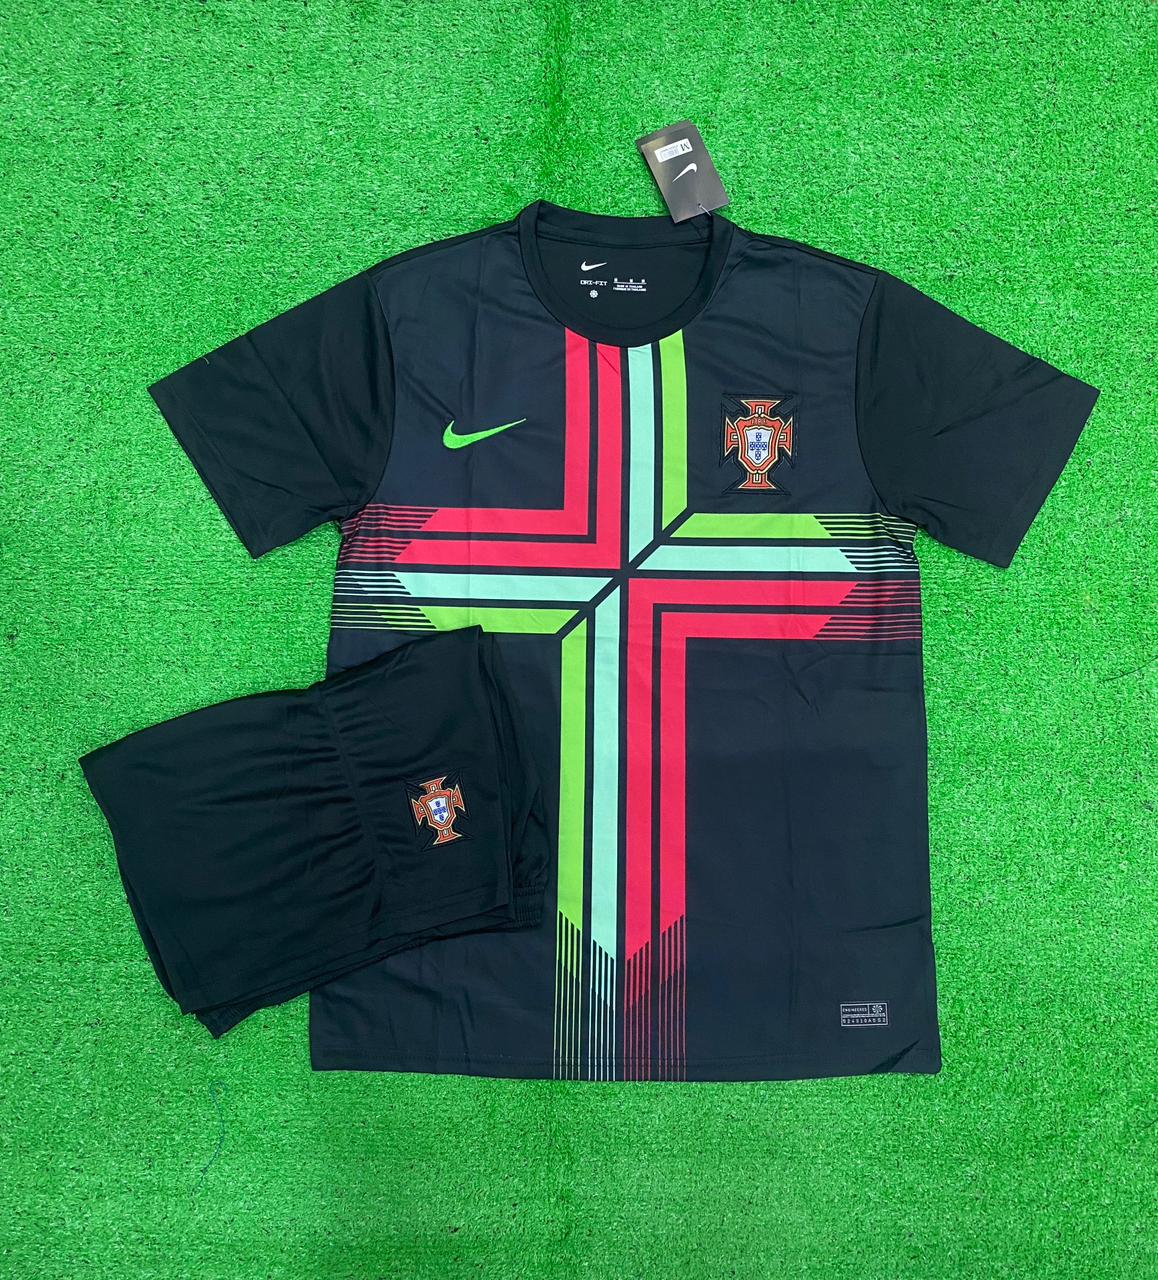 Portugal 2018 World Cup Black Pre Match Jersey [JERSEY + SHORTS]